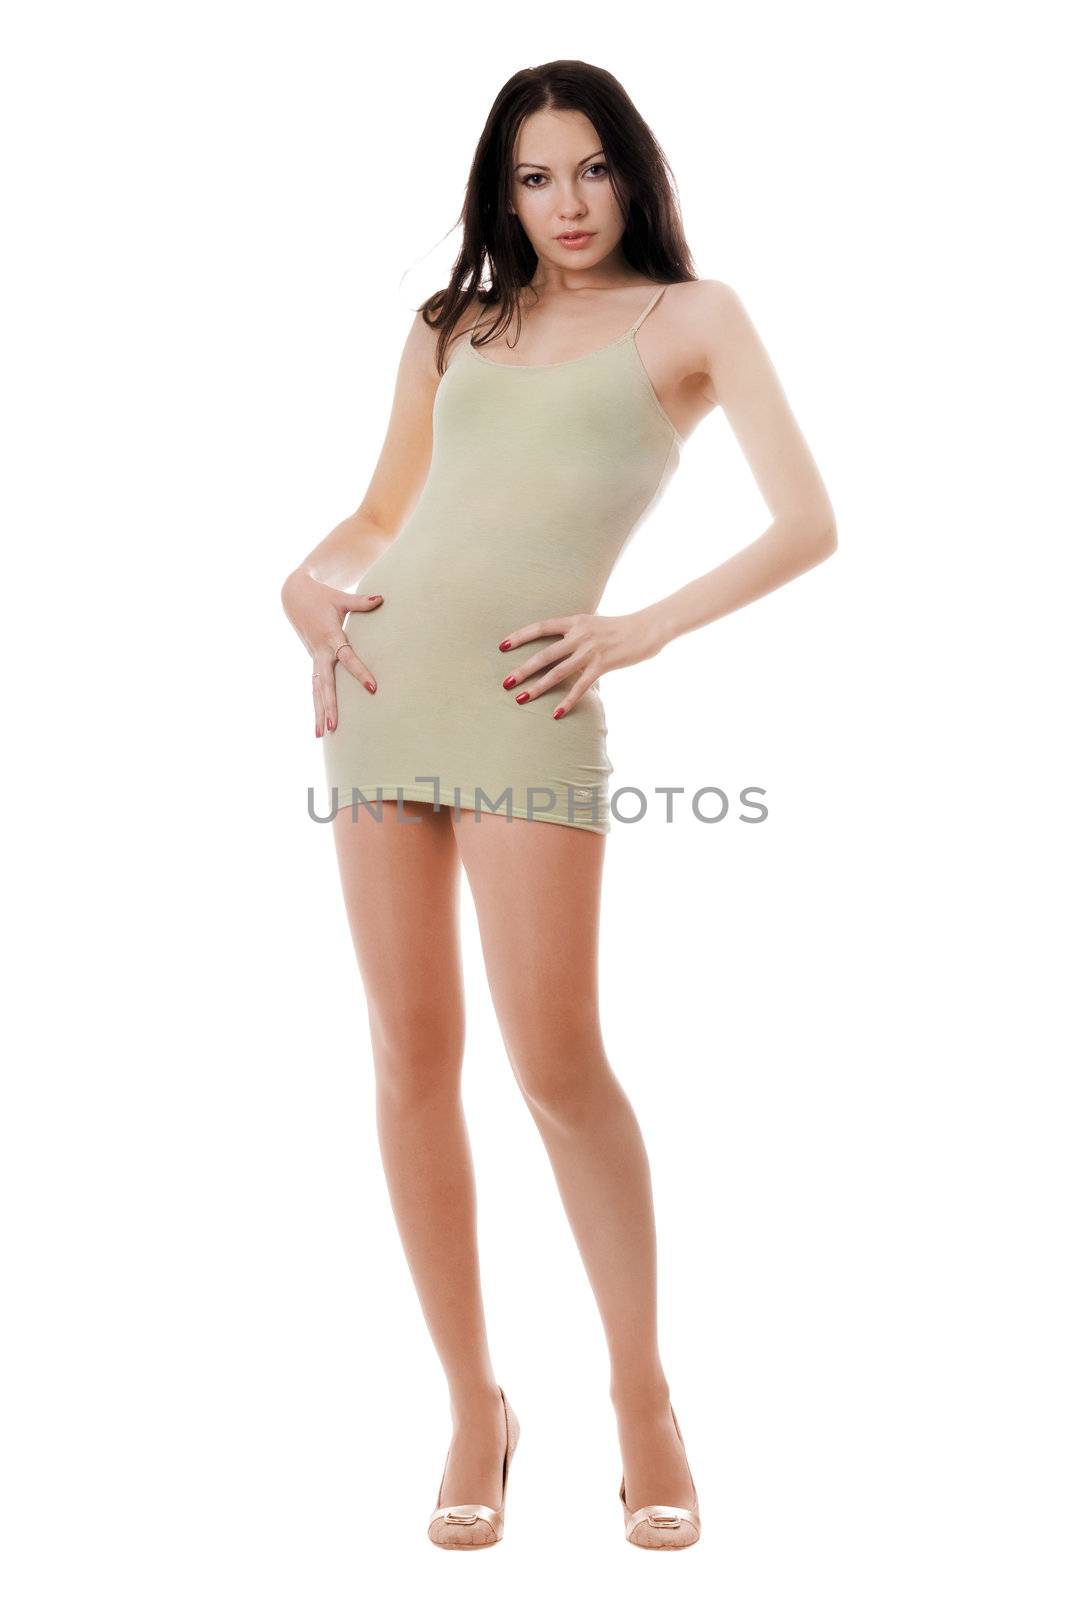 Young playful woman posing in tight-fitting olive dress. Isolated